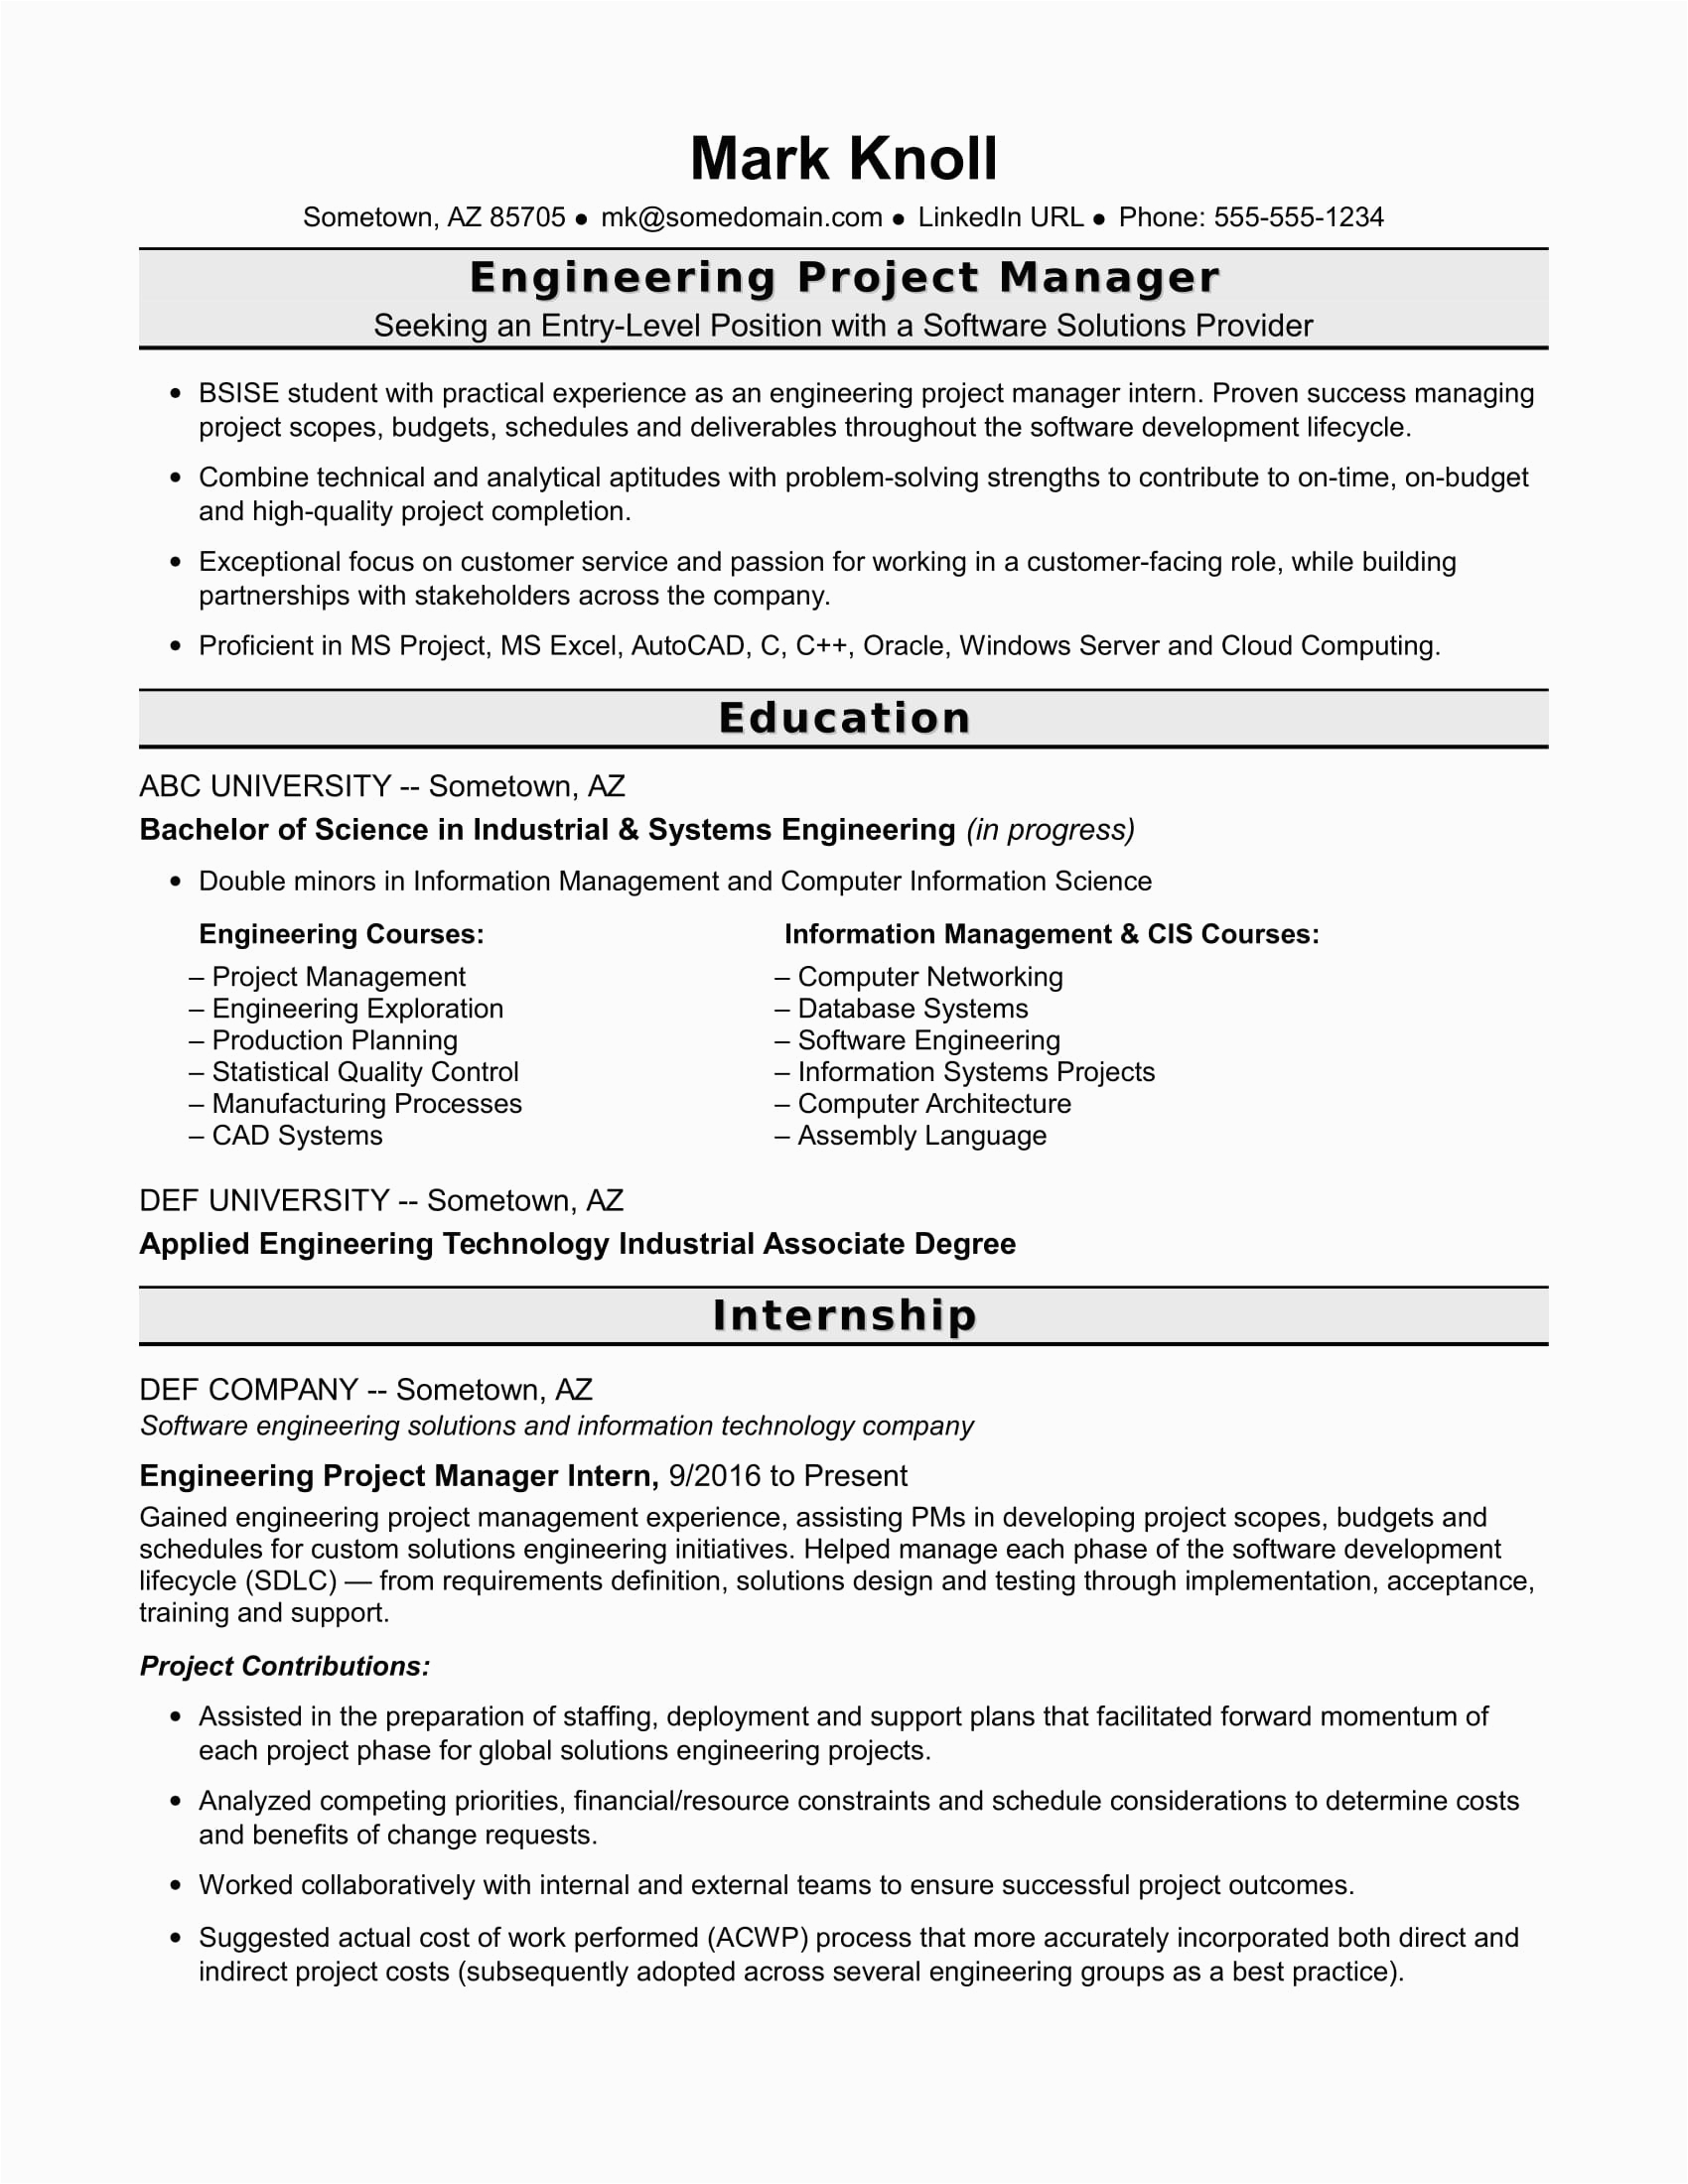 Entry Level Project Coordinator Resume Sample Entry Level Project Manager Resume for Engineers